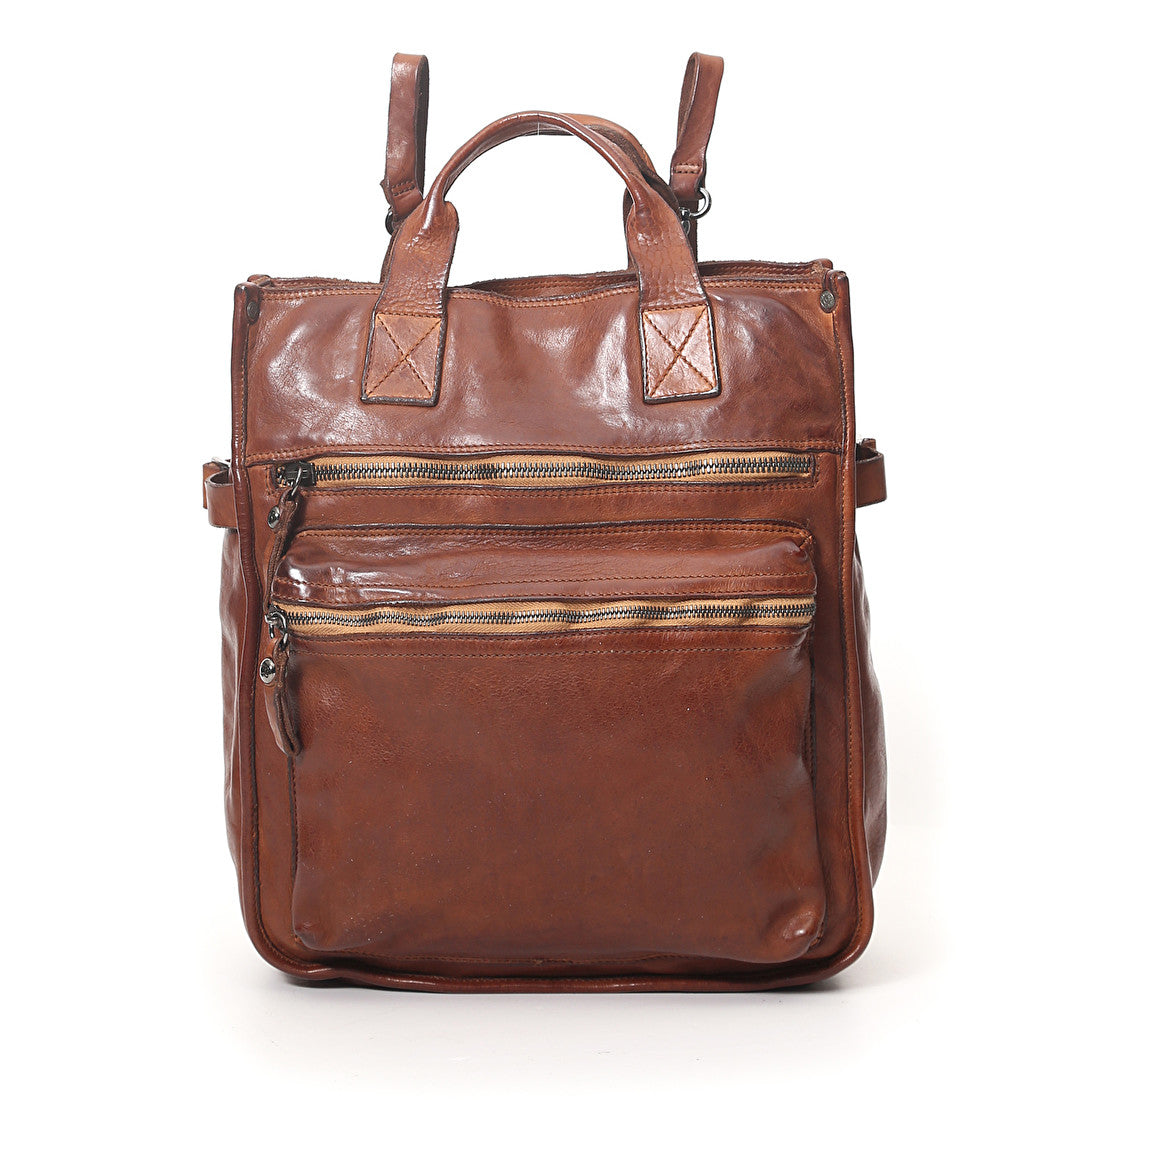 Campomaggi Gelso Shopping Bag/Backpack in cognac leather